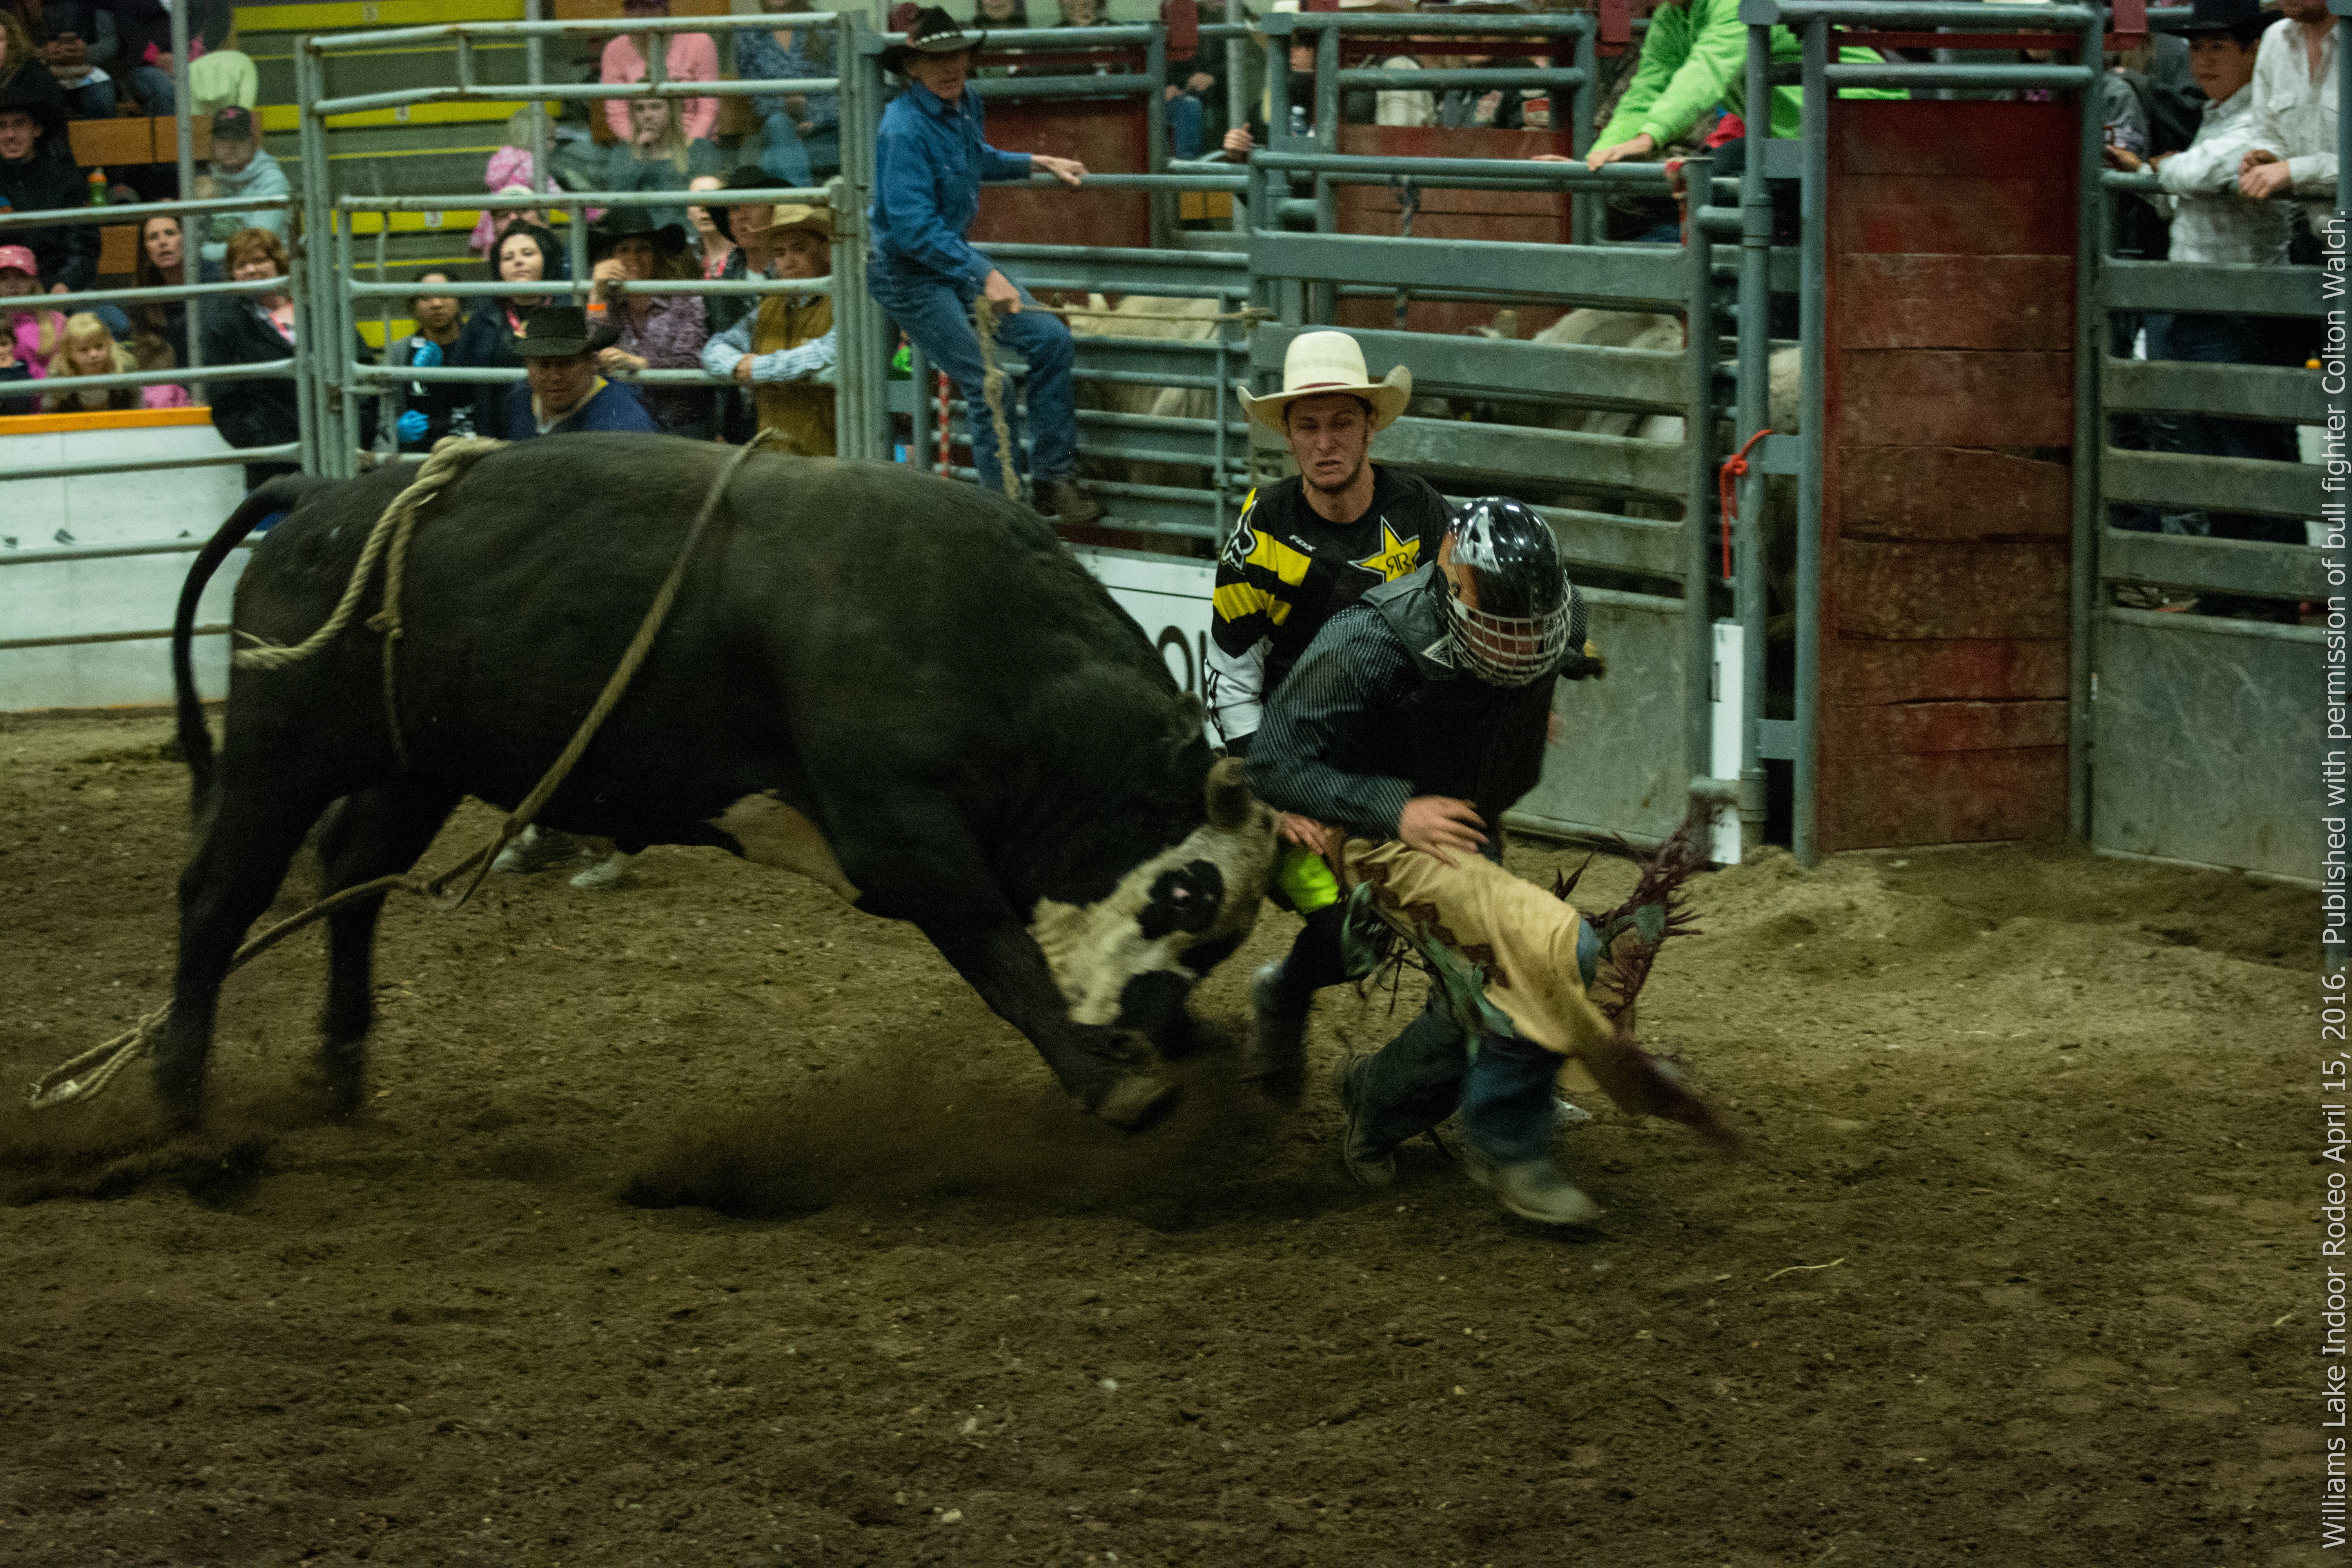 Rodeo clowns and bullfighters at the Williams Lake Indoor Rodeo